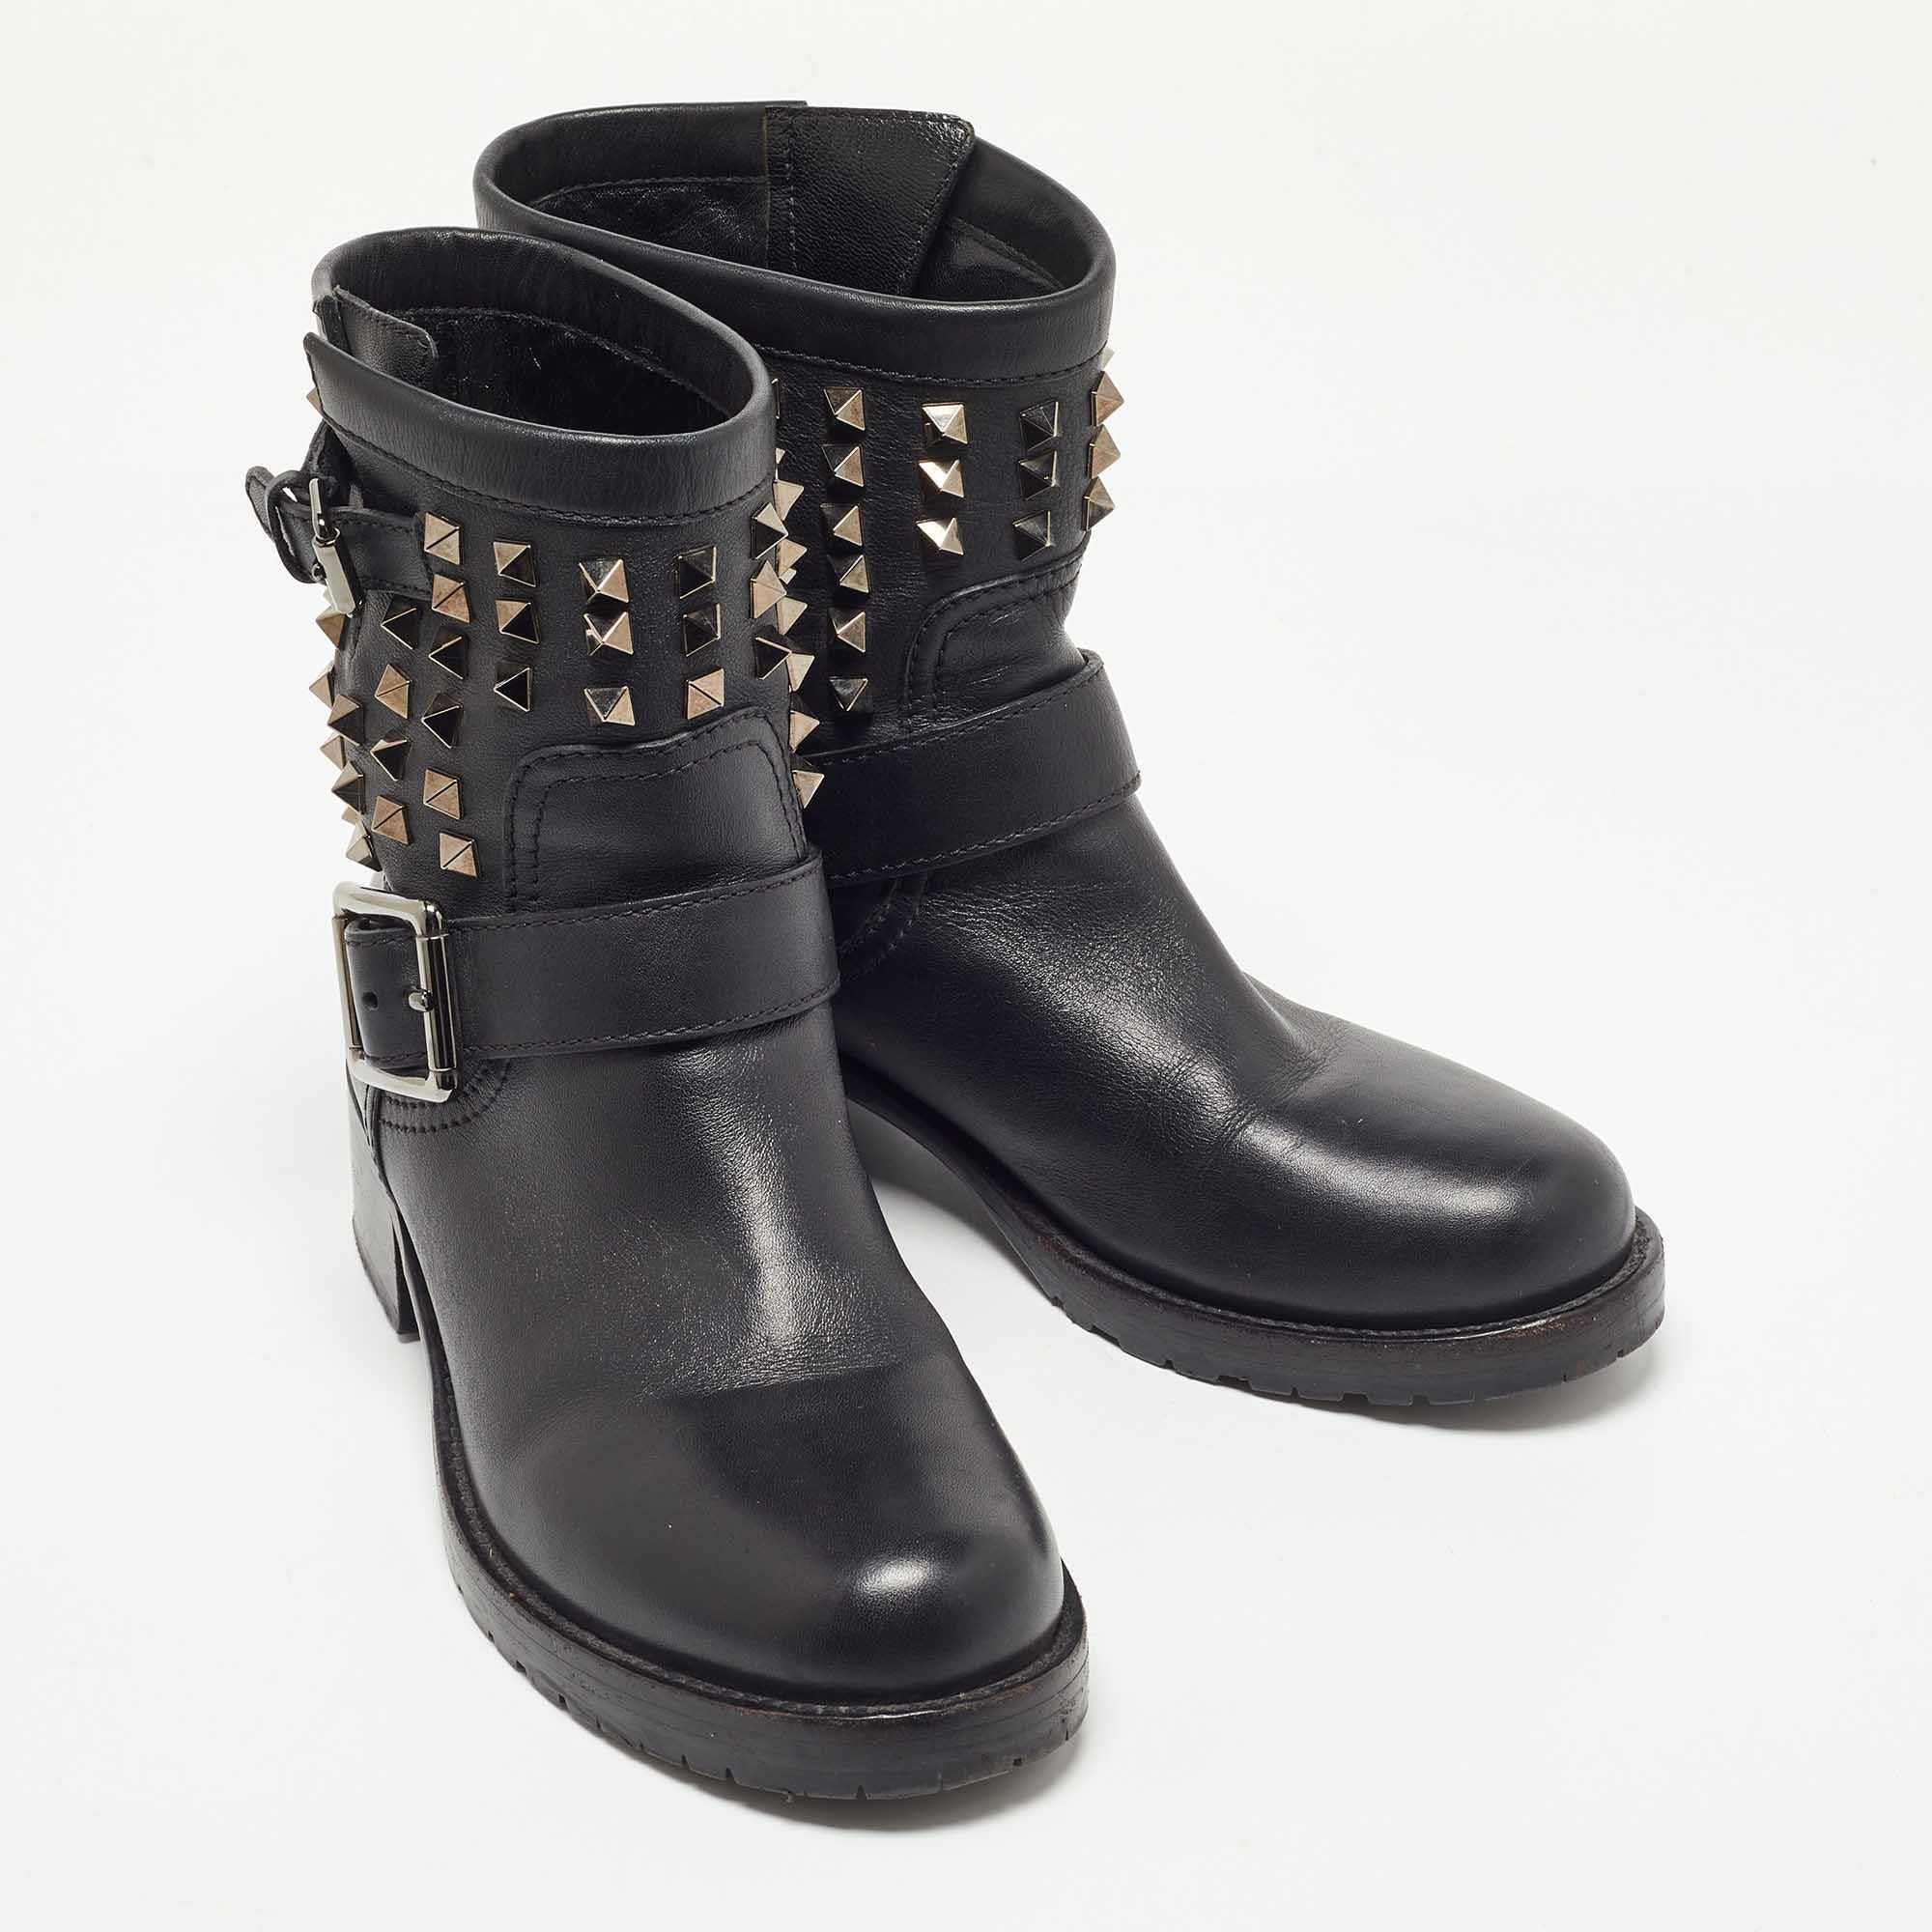 Valentino Black Leather Rockstud Ankle Boots Size 37 3